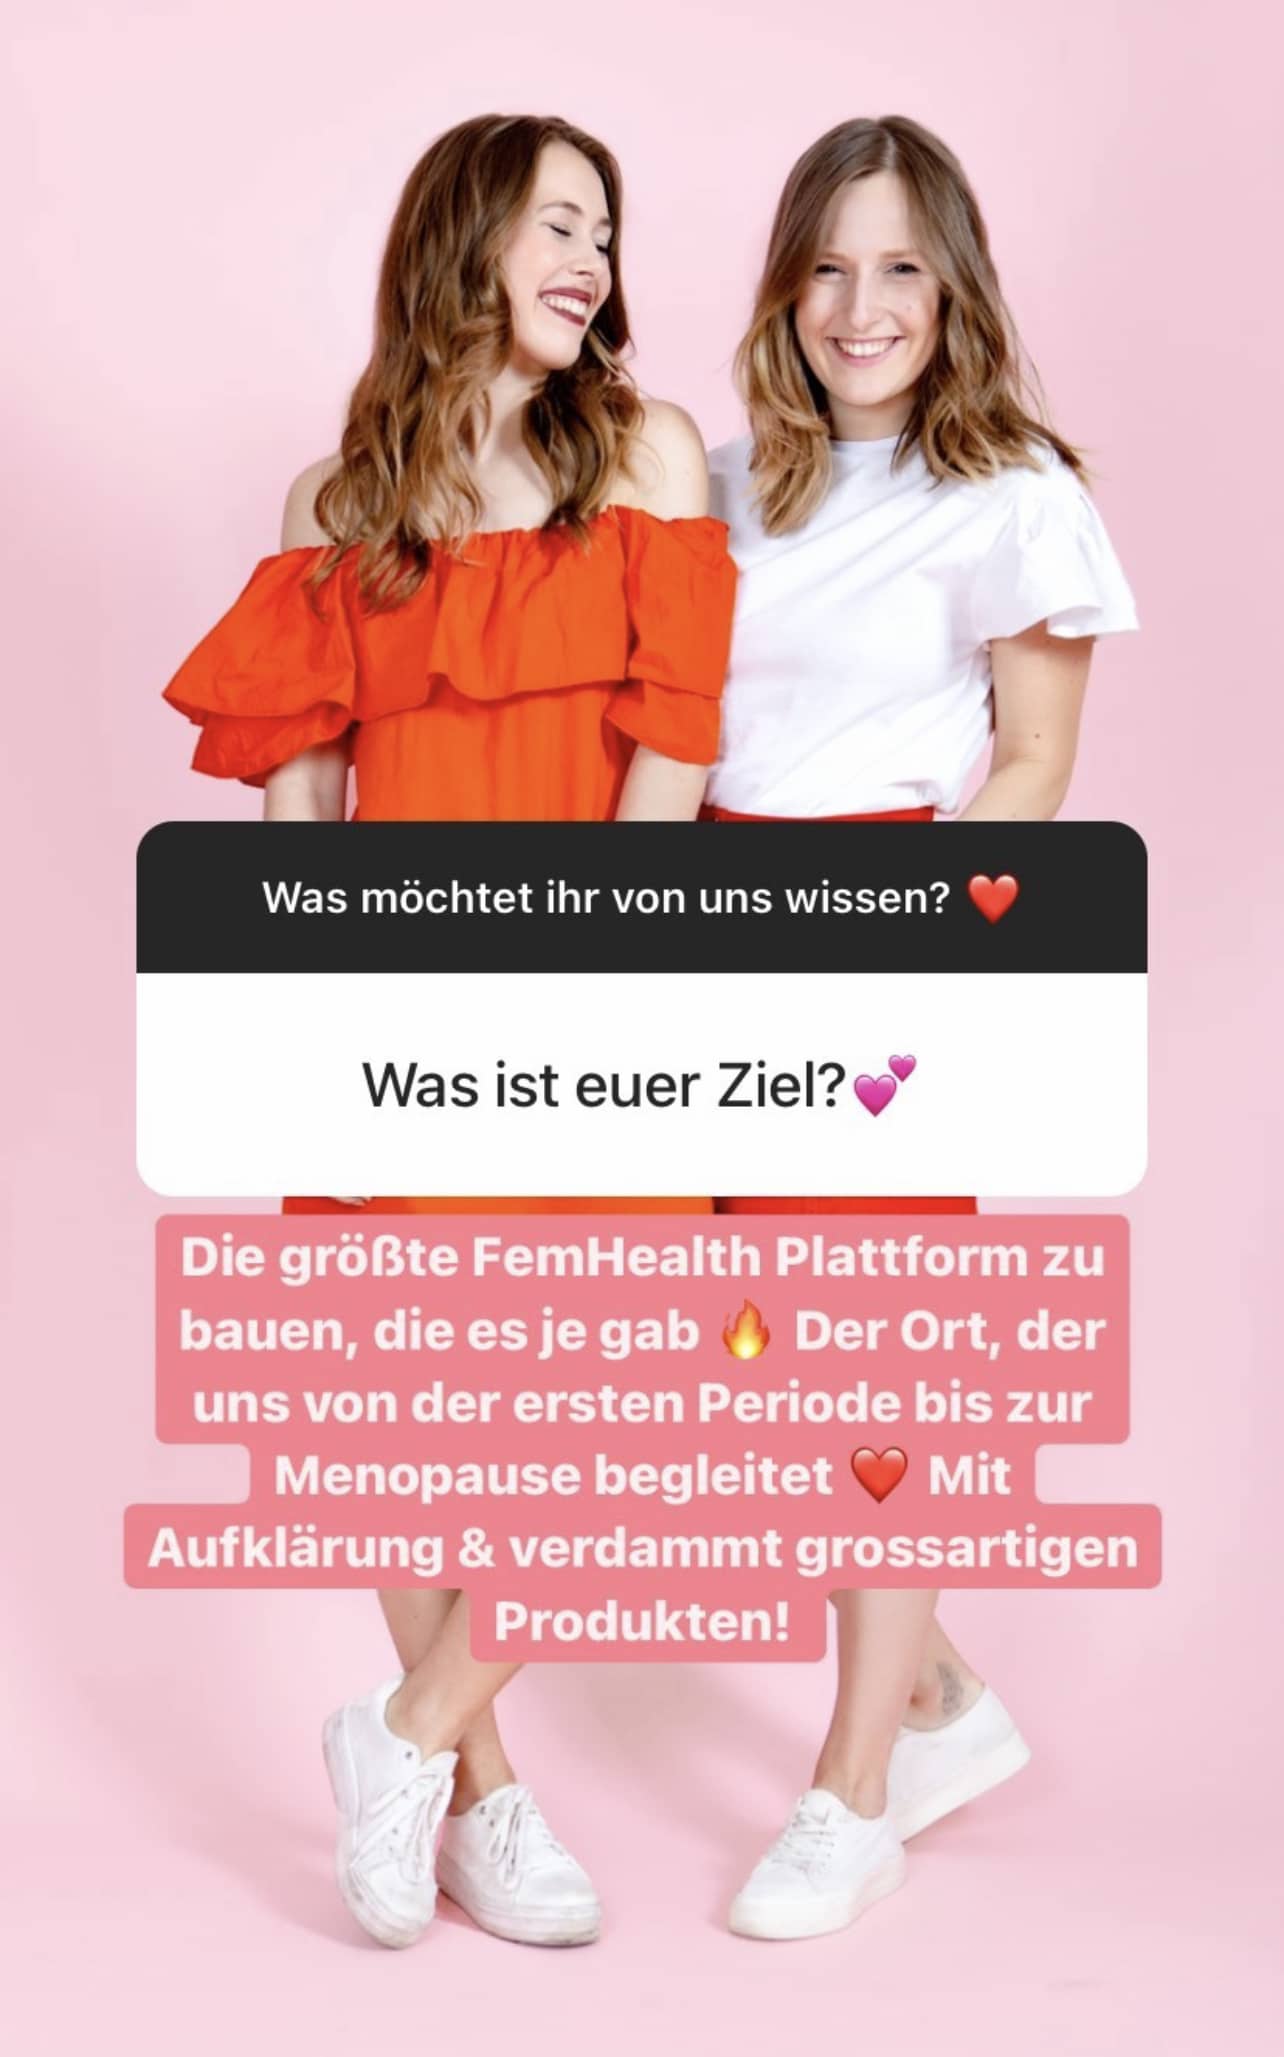 MISSION the female company Ziel Periodenprodukte